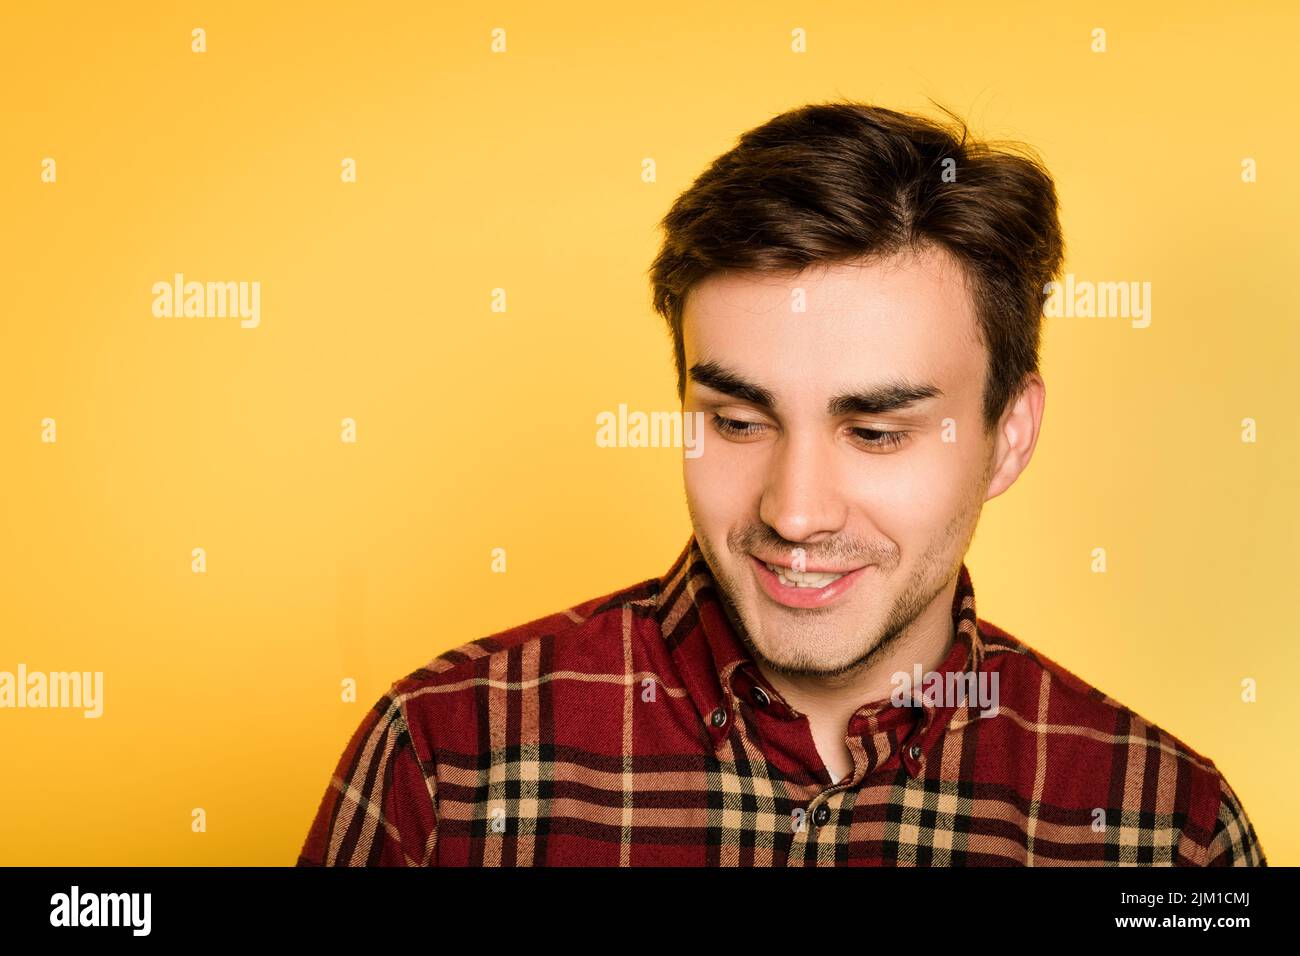 smiling mysterious man looking sideways emotion Stock Photo